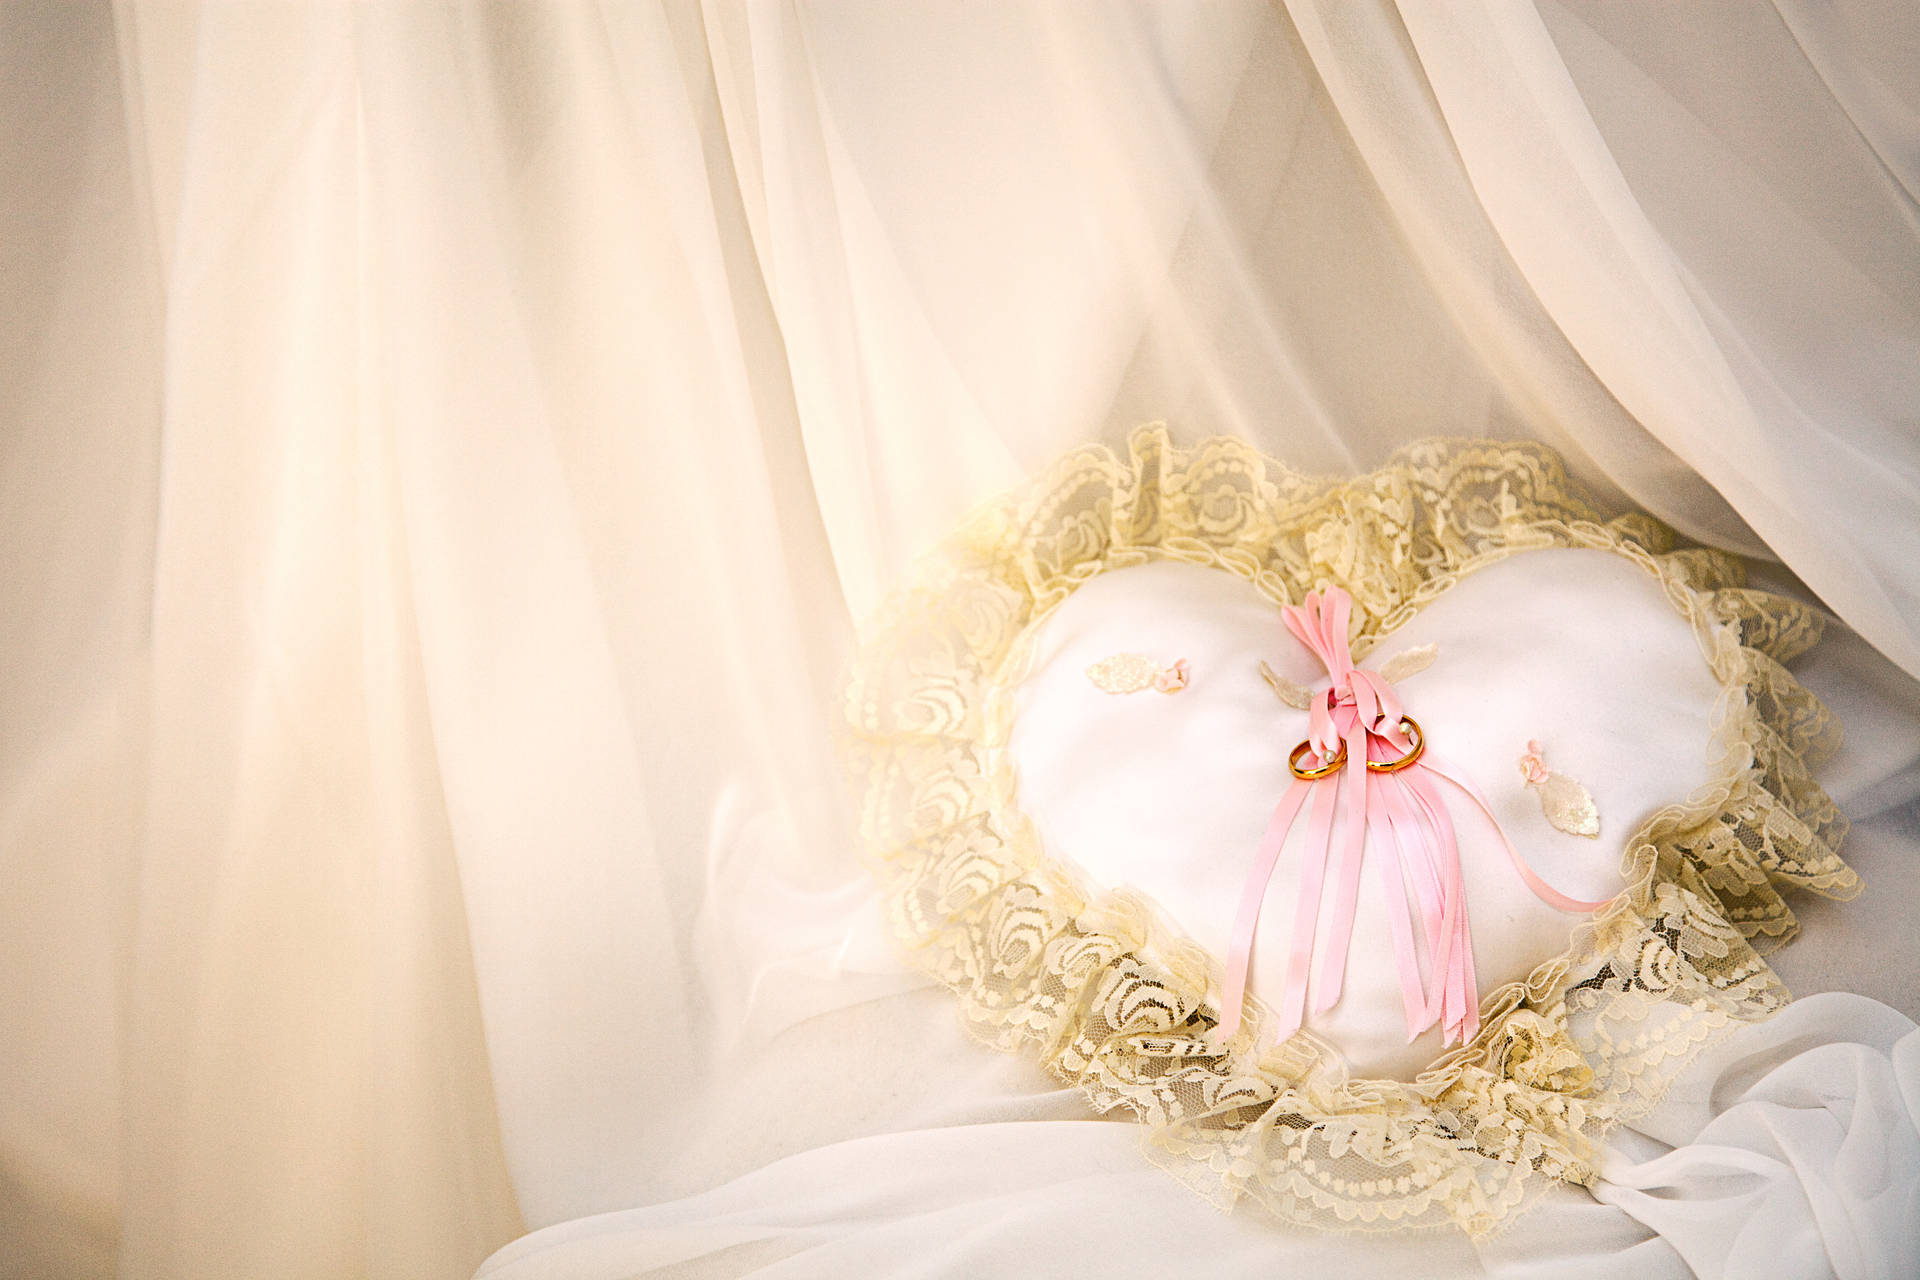 Wedding 5616X3744 Wallpaper and Background Image